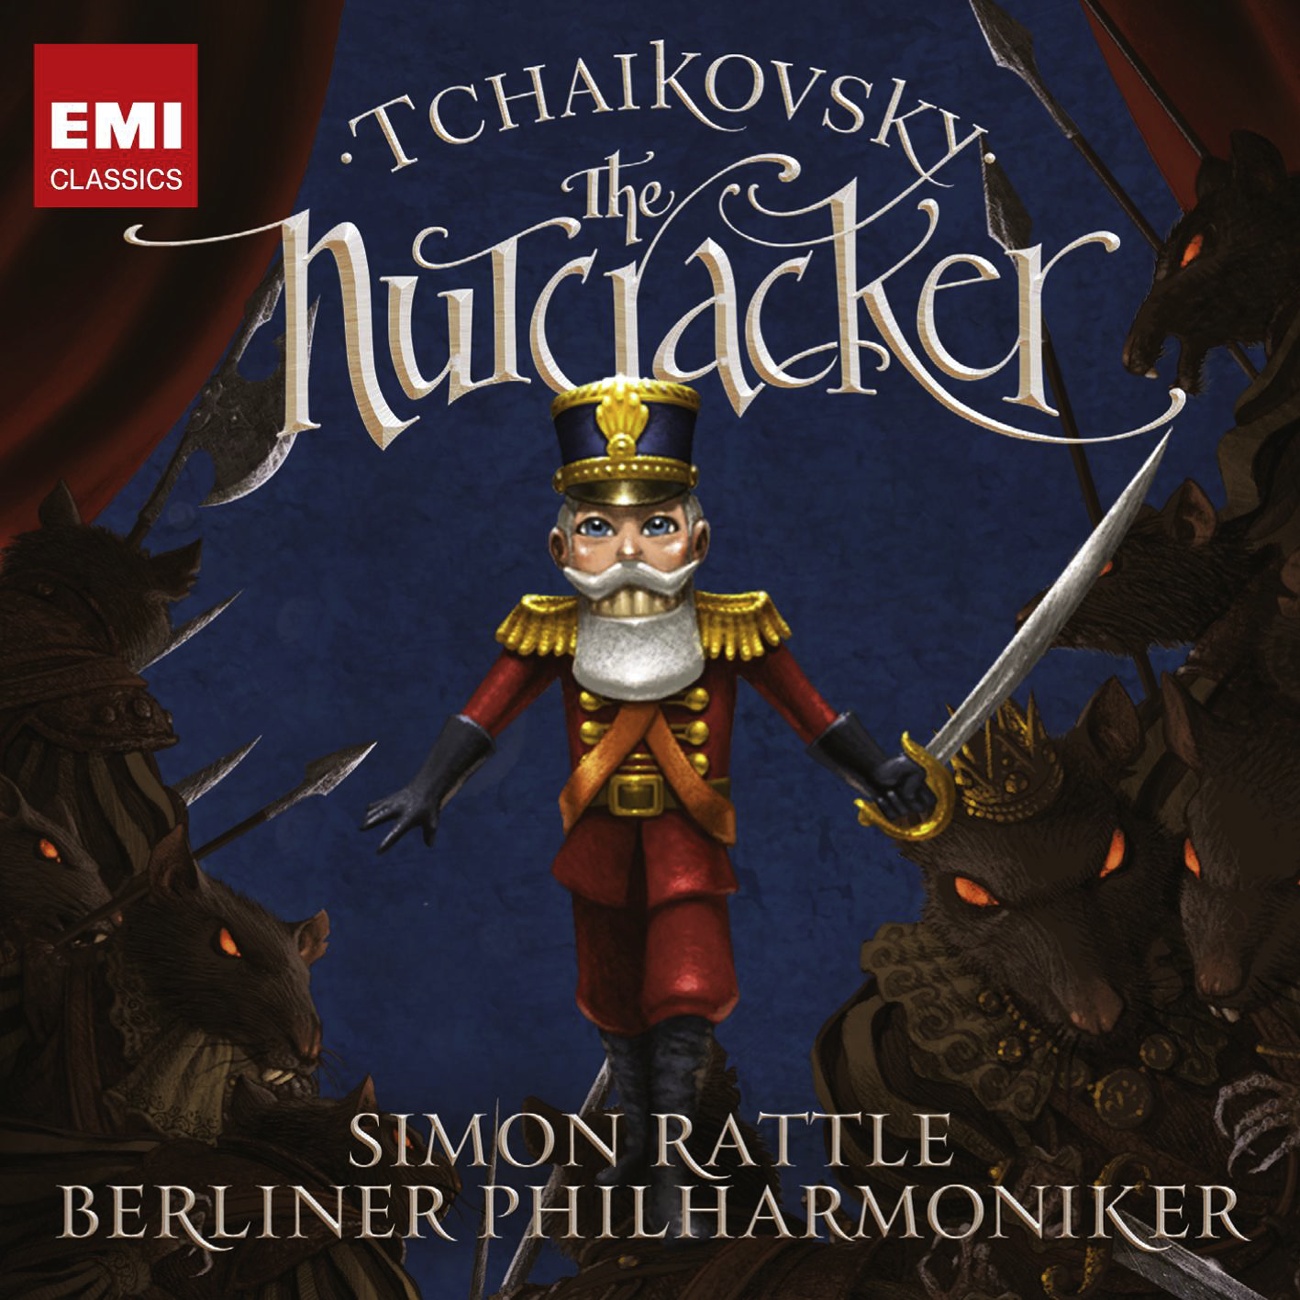 The Nutcracker - Ballet Op. 71, ACT 1: No. 3 - Children's Galop and Entry of the Parents